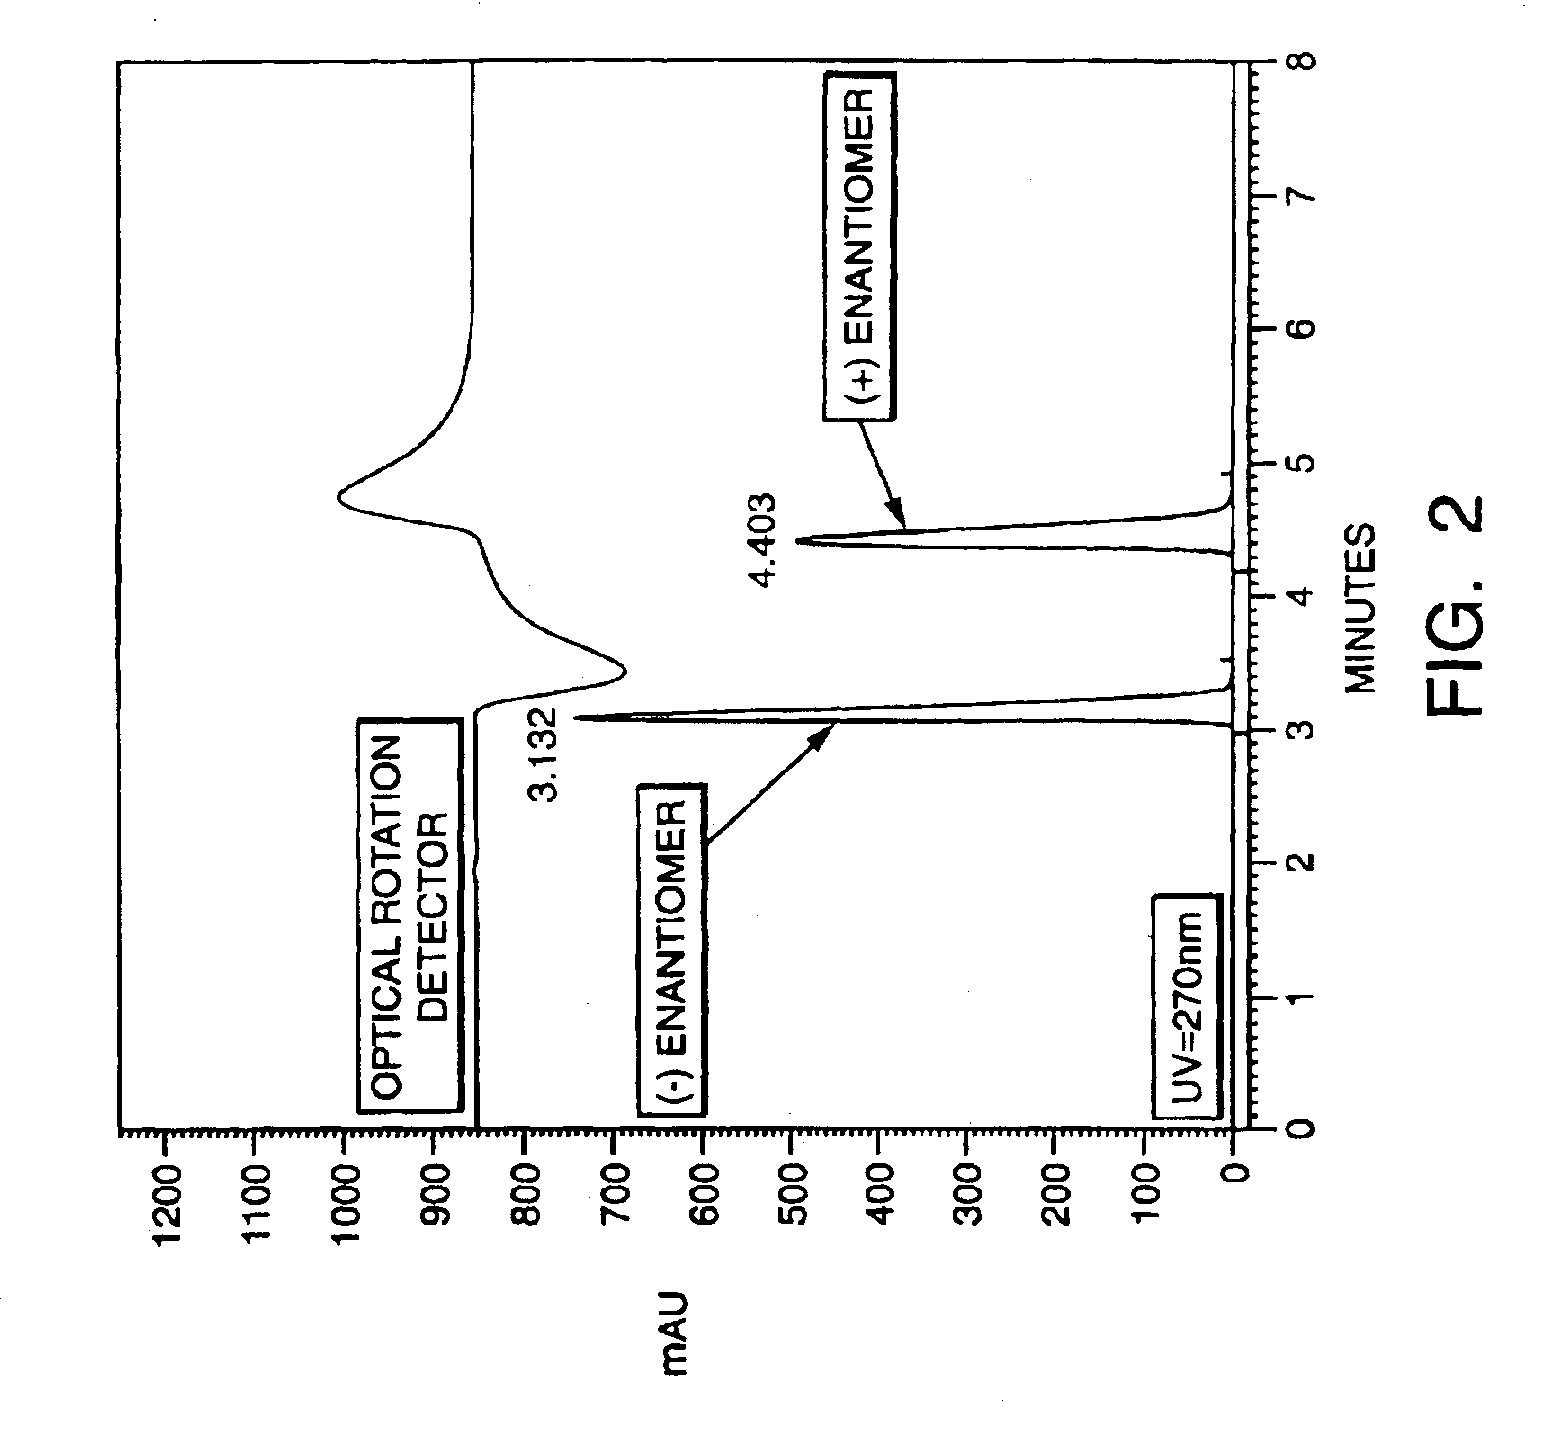 Methods for the treatment of central nervous system disorders in certain patient groups